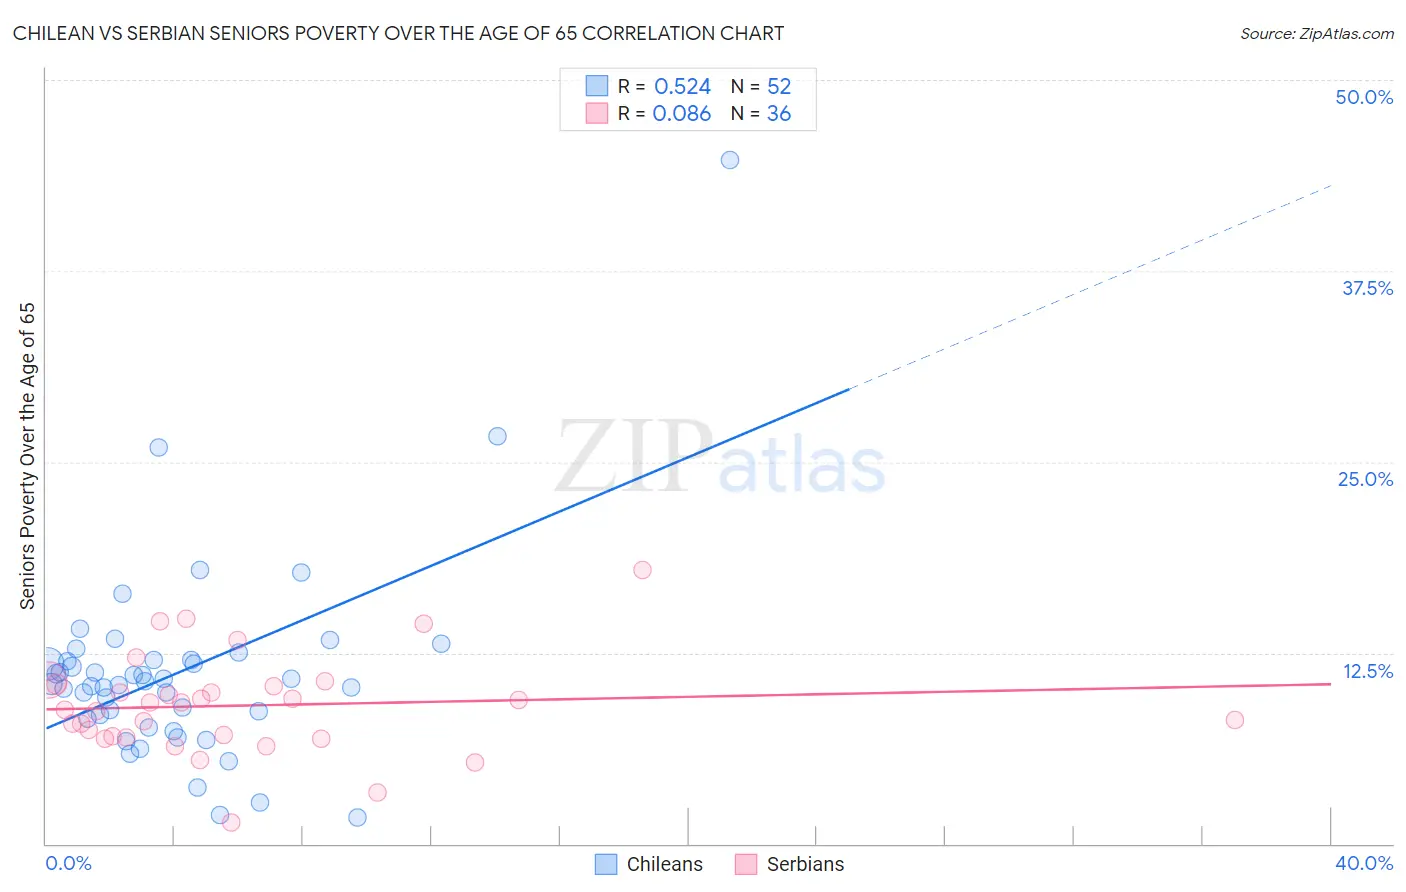 Chilean vs Serbian Seniors Poverty Over the Age of 65